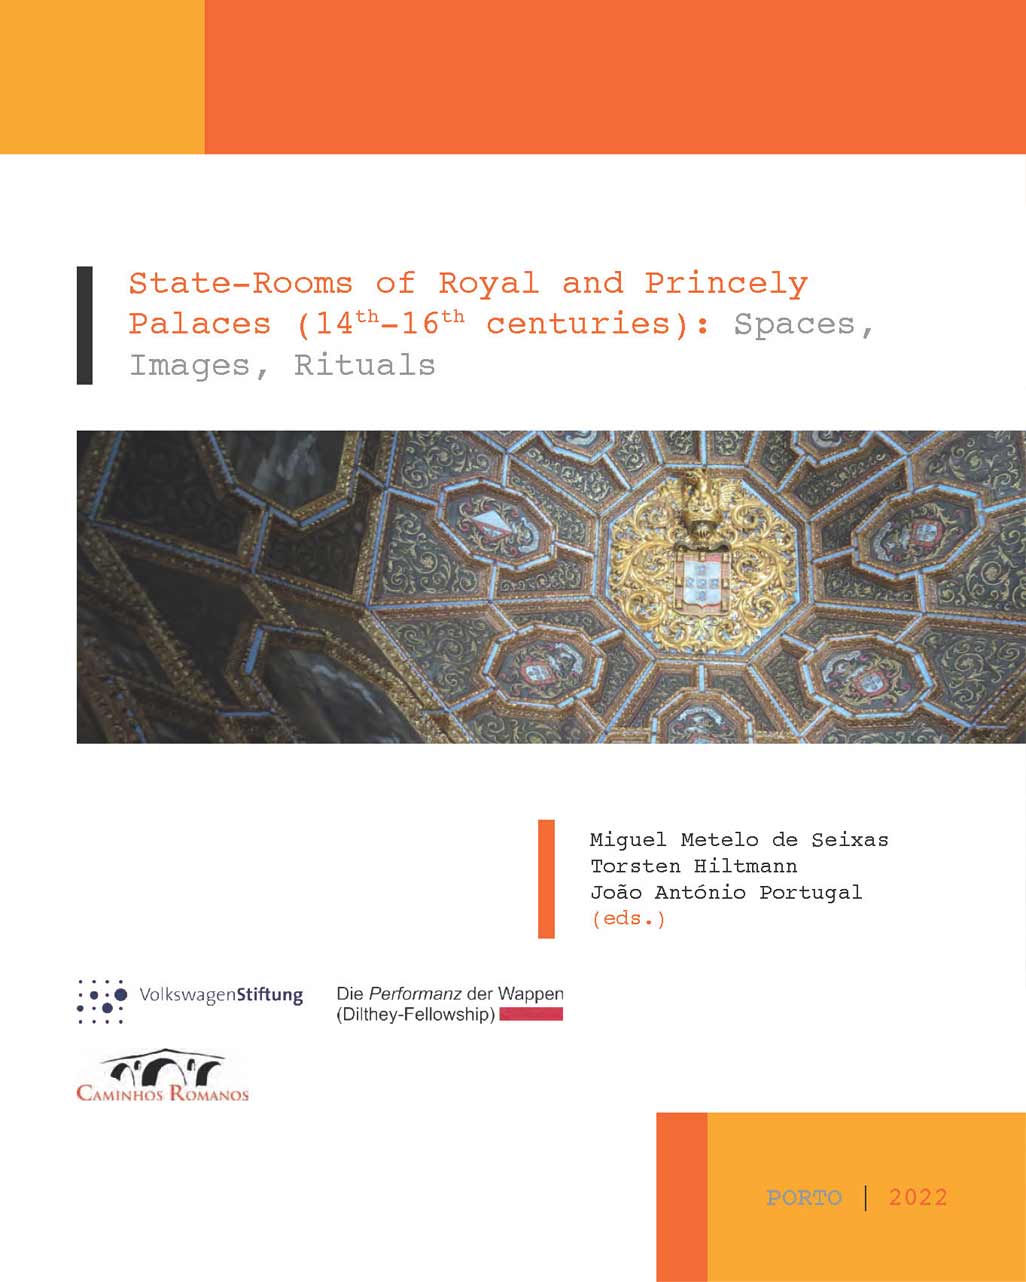 Capa da publicação State-Rooms of Royal and Princely Palaces in Europe (14th-16th centuries): Spaces, Images, Rituals